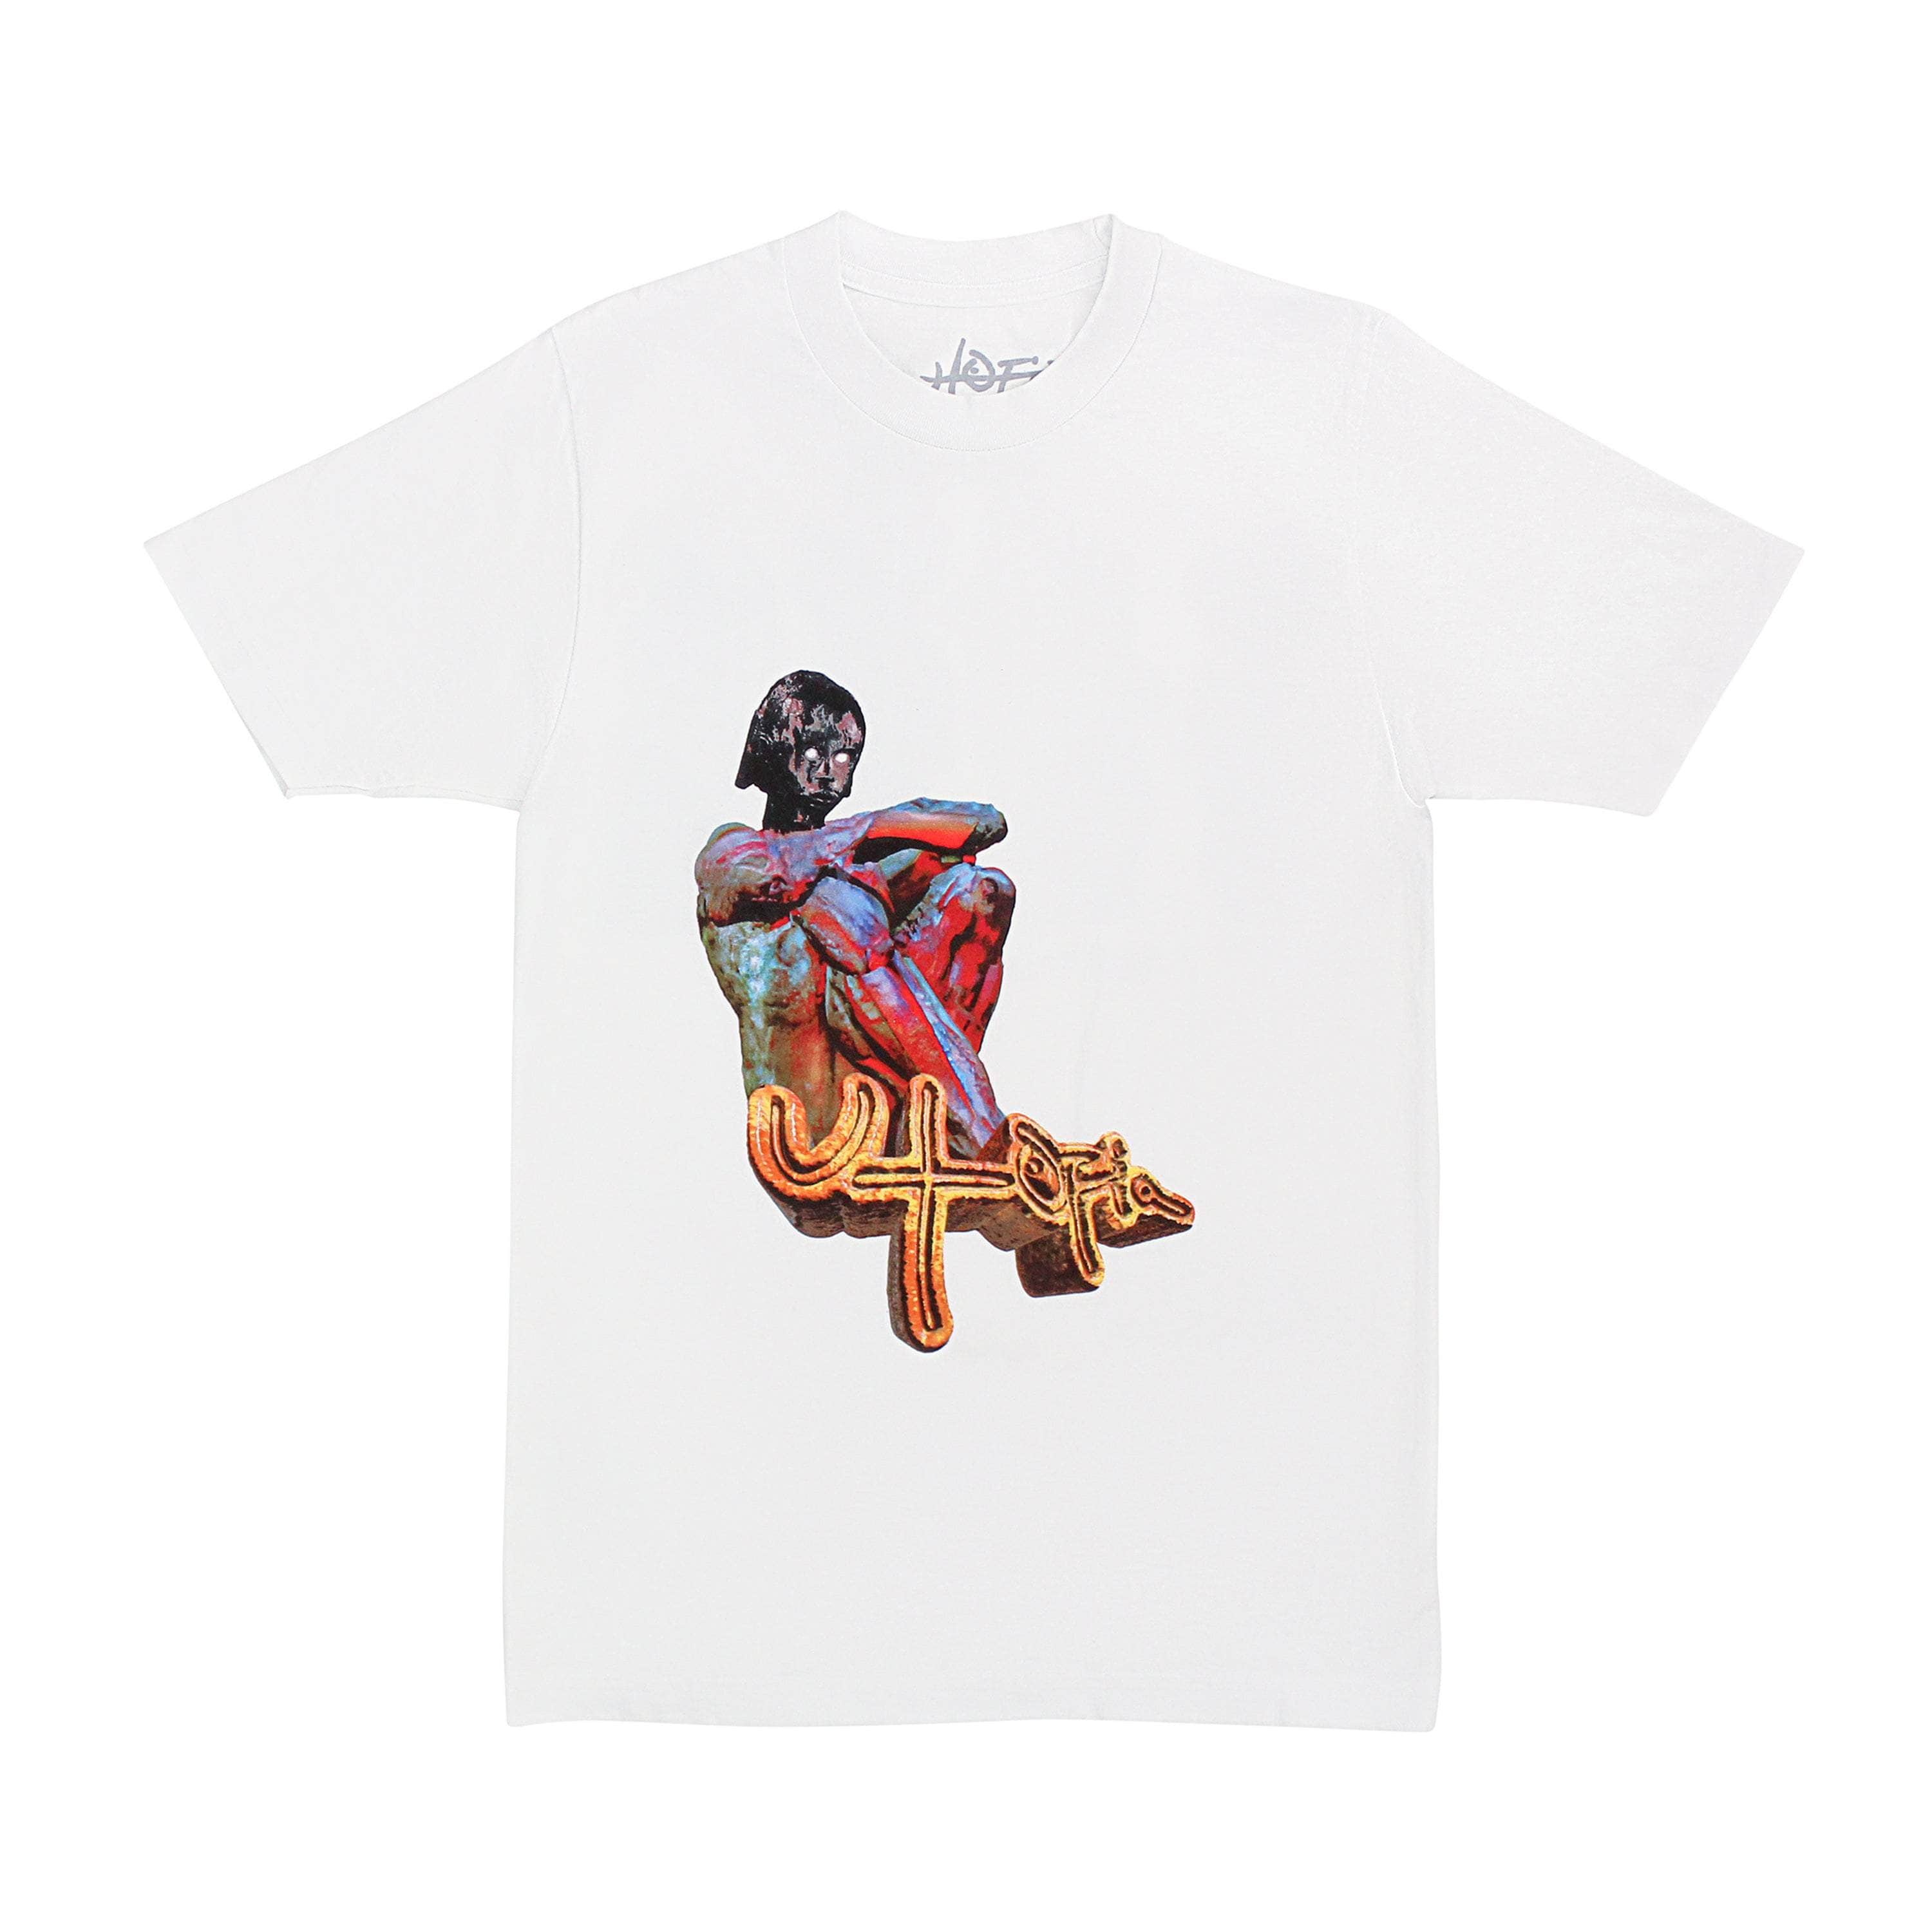 Travis Scott channelenable-all, chicmi, couponcollection, main-clothing, shop375, Stadium Goods, under-250 White Utopia B1 T-Shirt